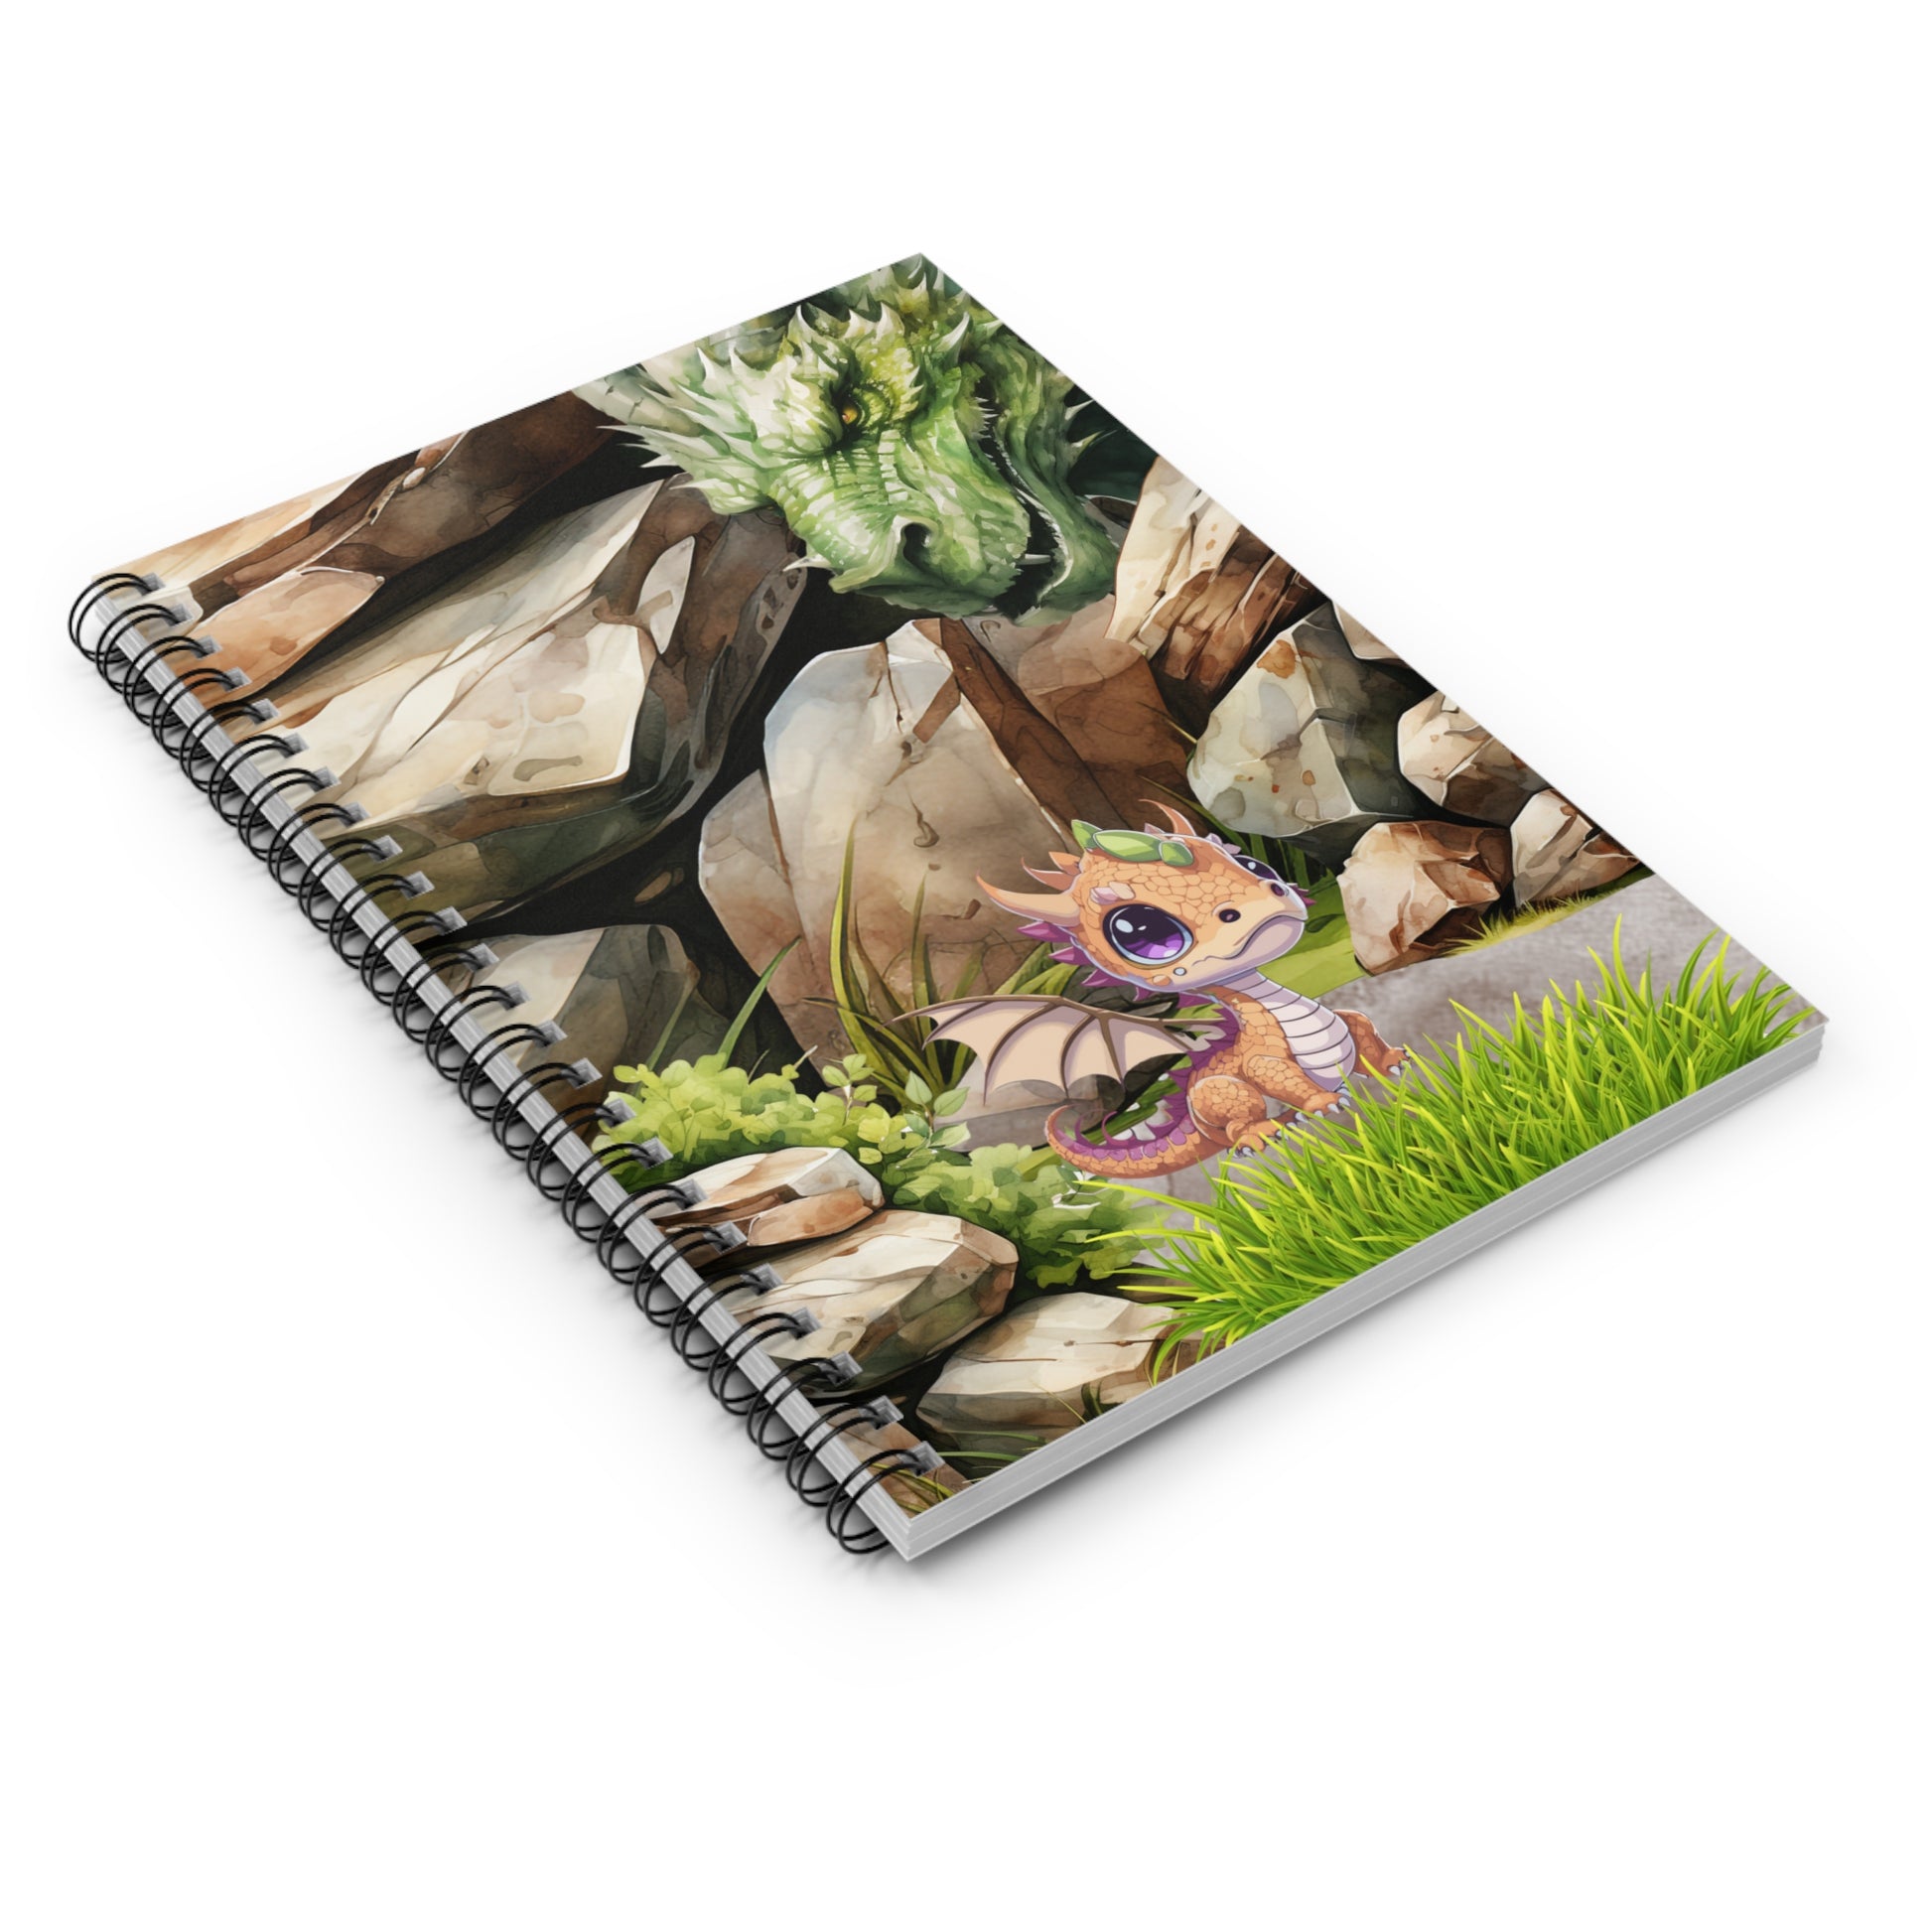 Daddy's Girl: Spiral Notebook - Log Books - Journals - Diaries - and More Custom Printed by TheGlassyLass.com